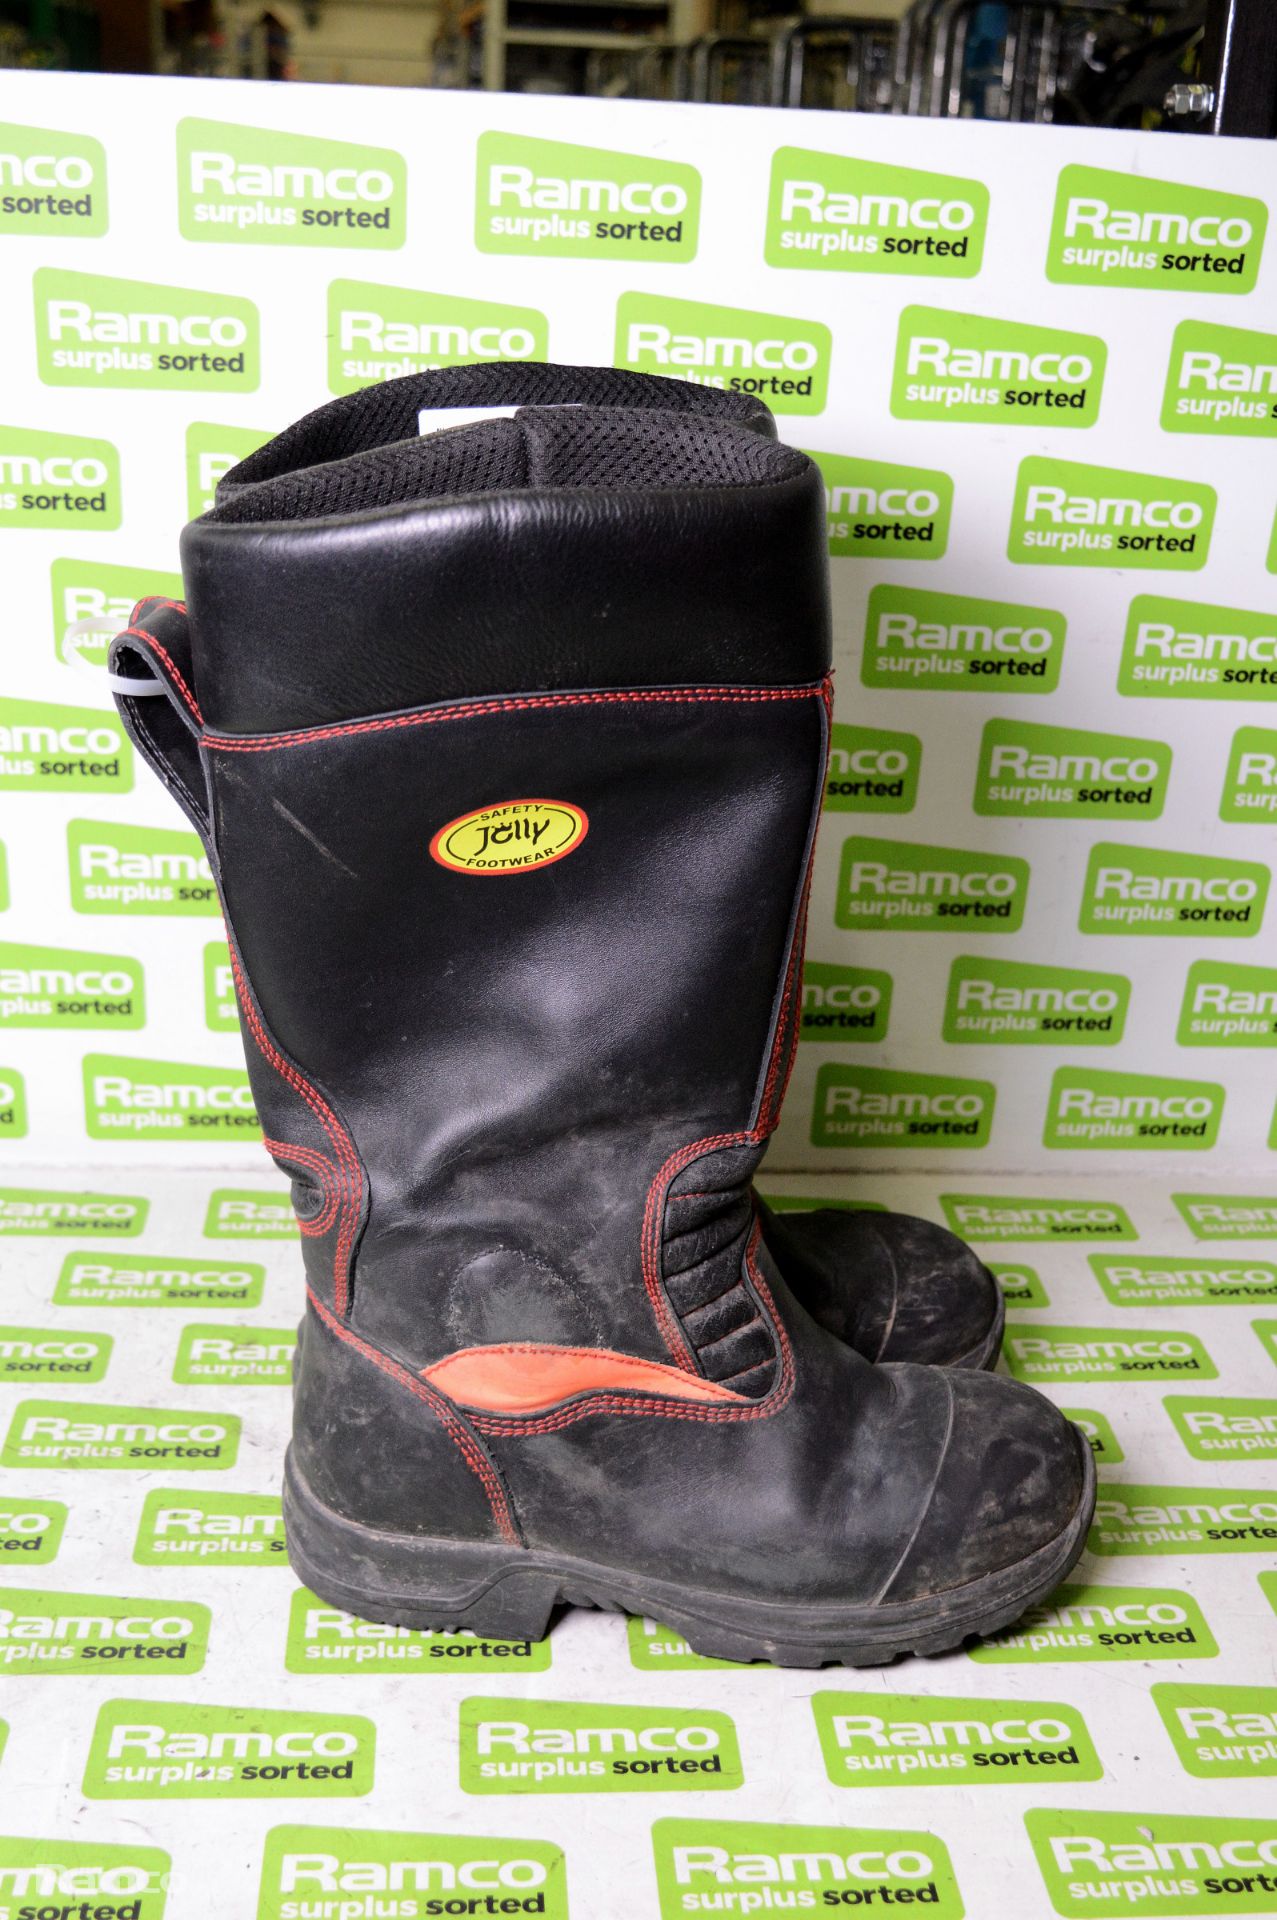 Jolly Safety Footwear CE 0498 boots - size: EU 41, UK 7 - Image 2 of 3